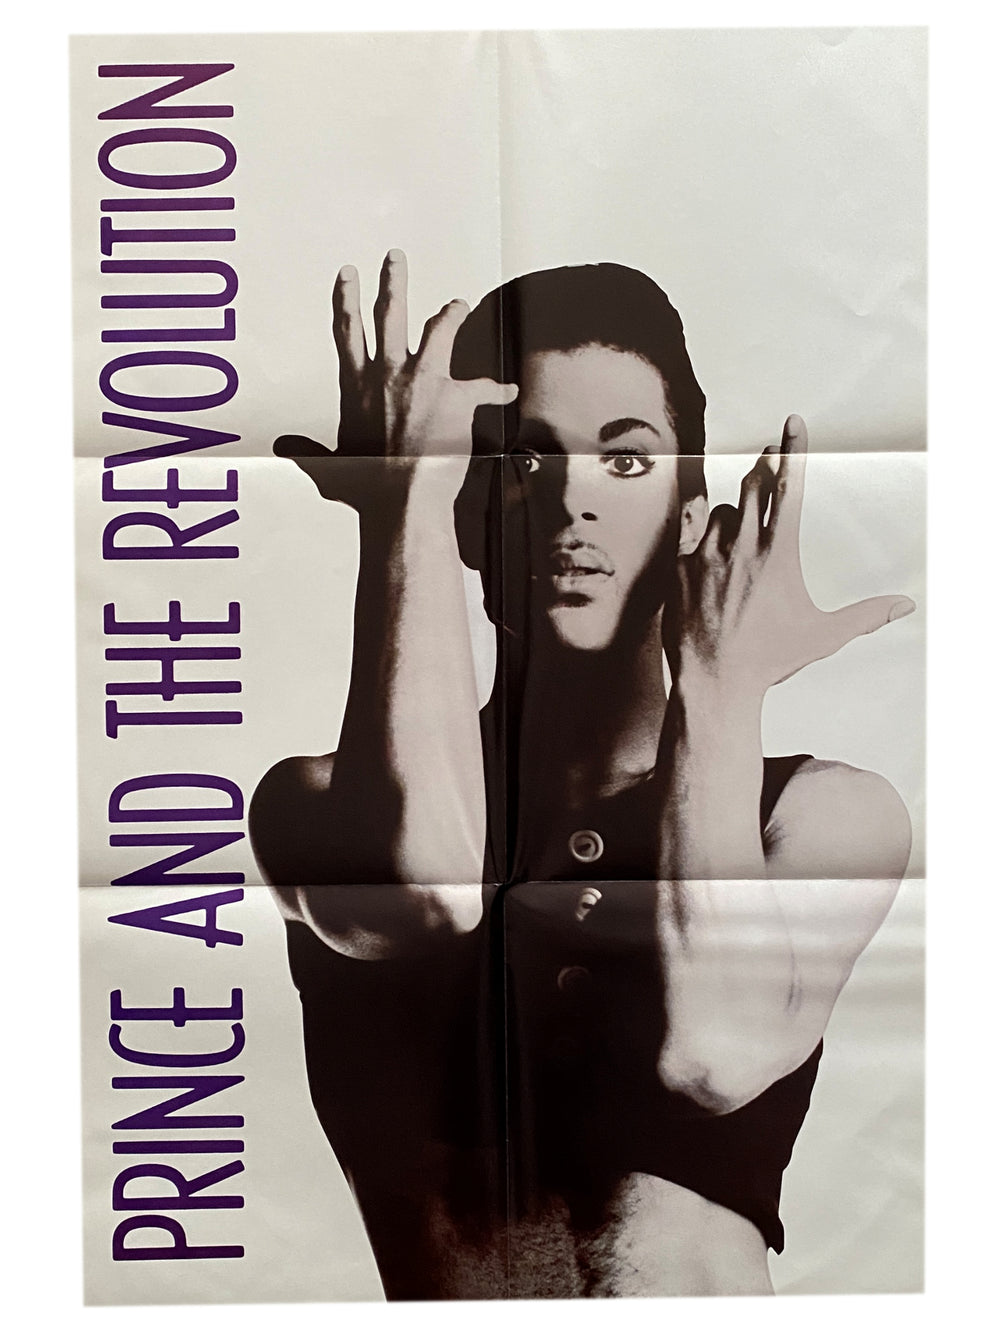 Prince & The Revolution Girls & Boys 12 Inch Vinyl Single EU German Release With Poster